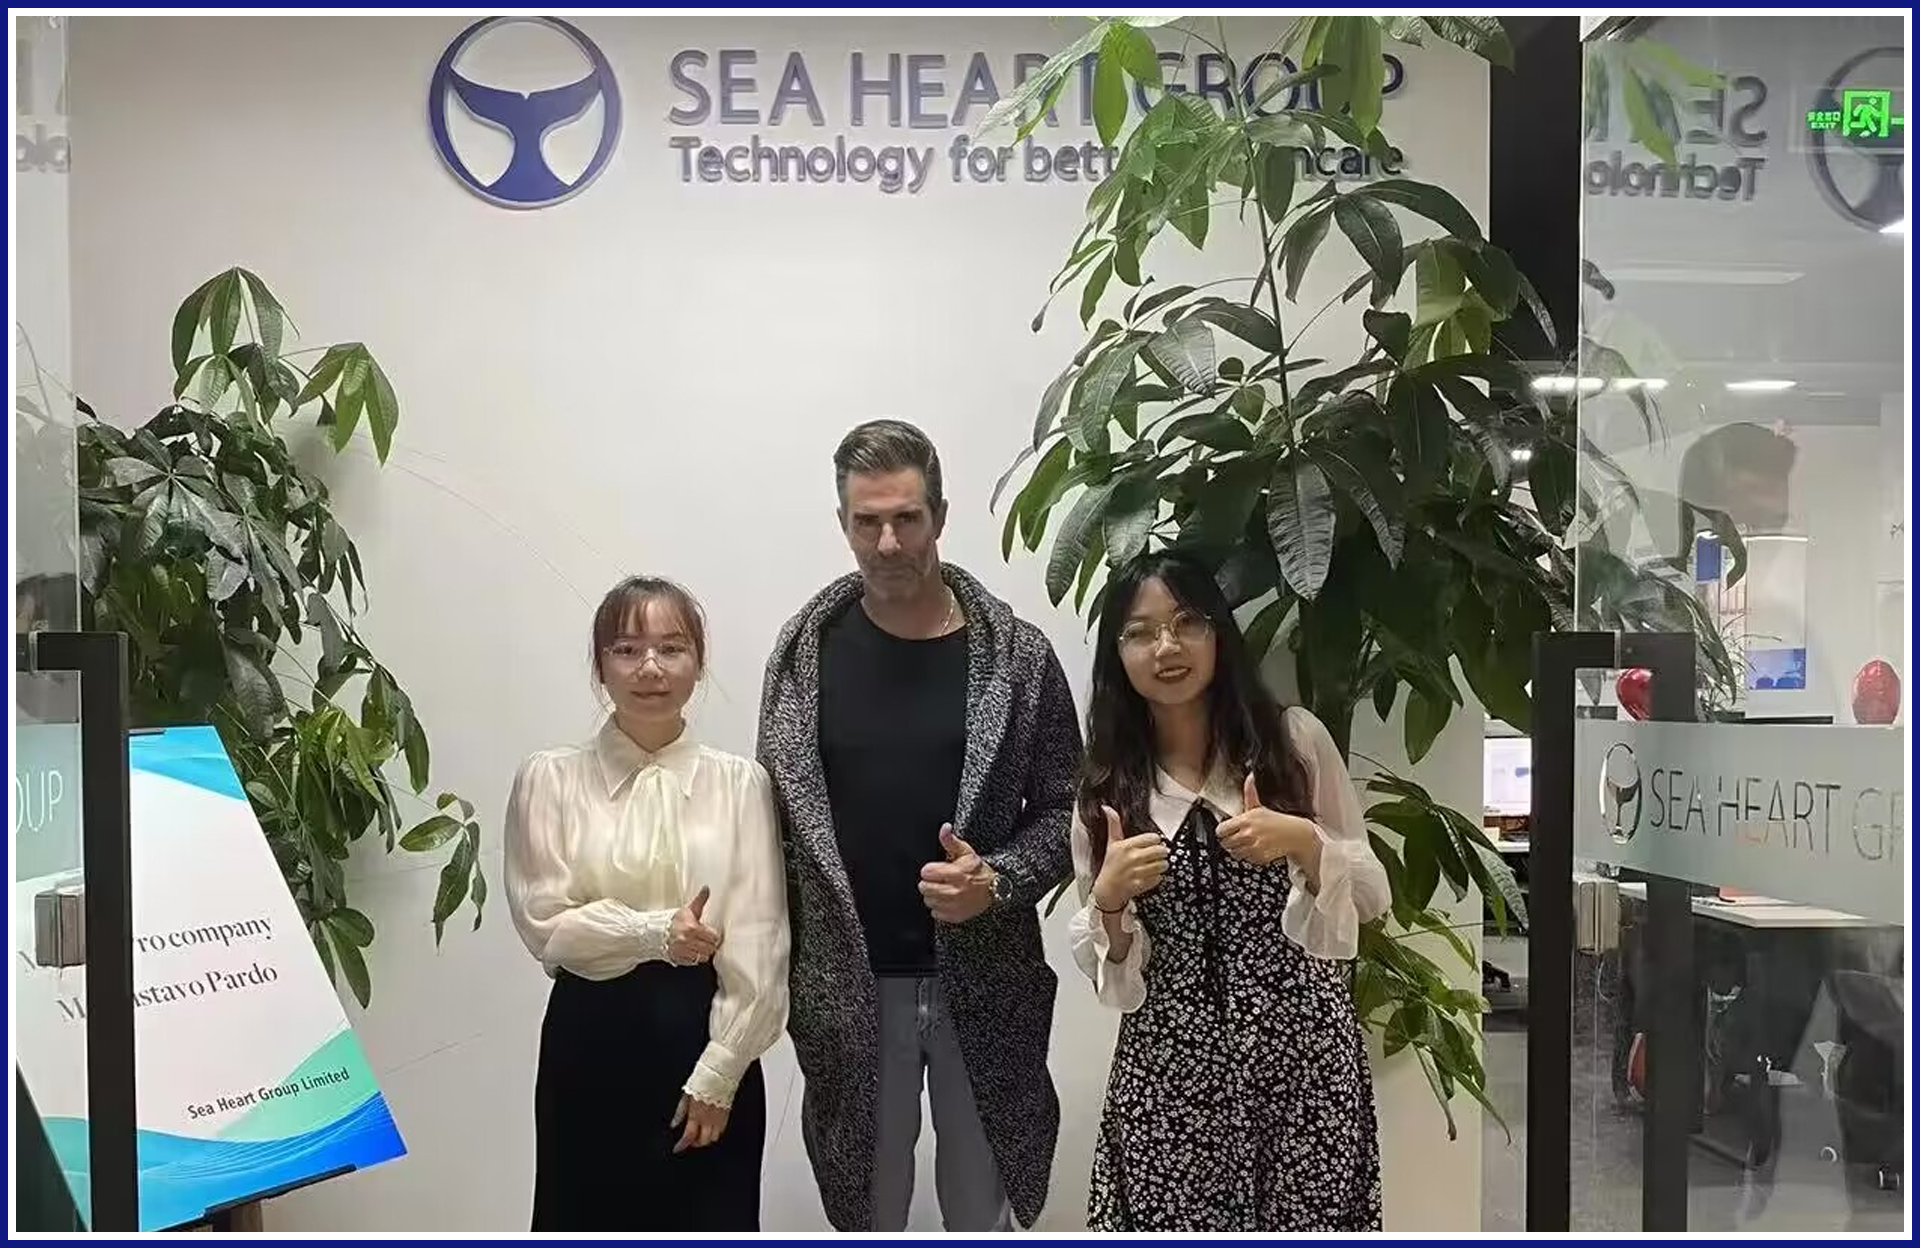 Spanish Star Client Visits SEA HEART group and purchases